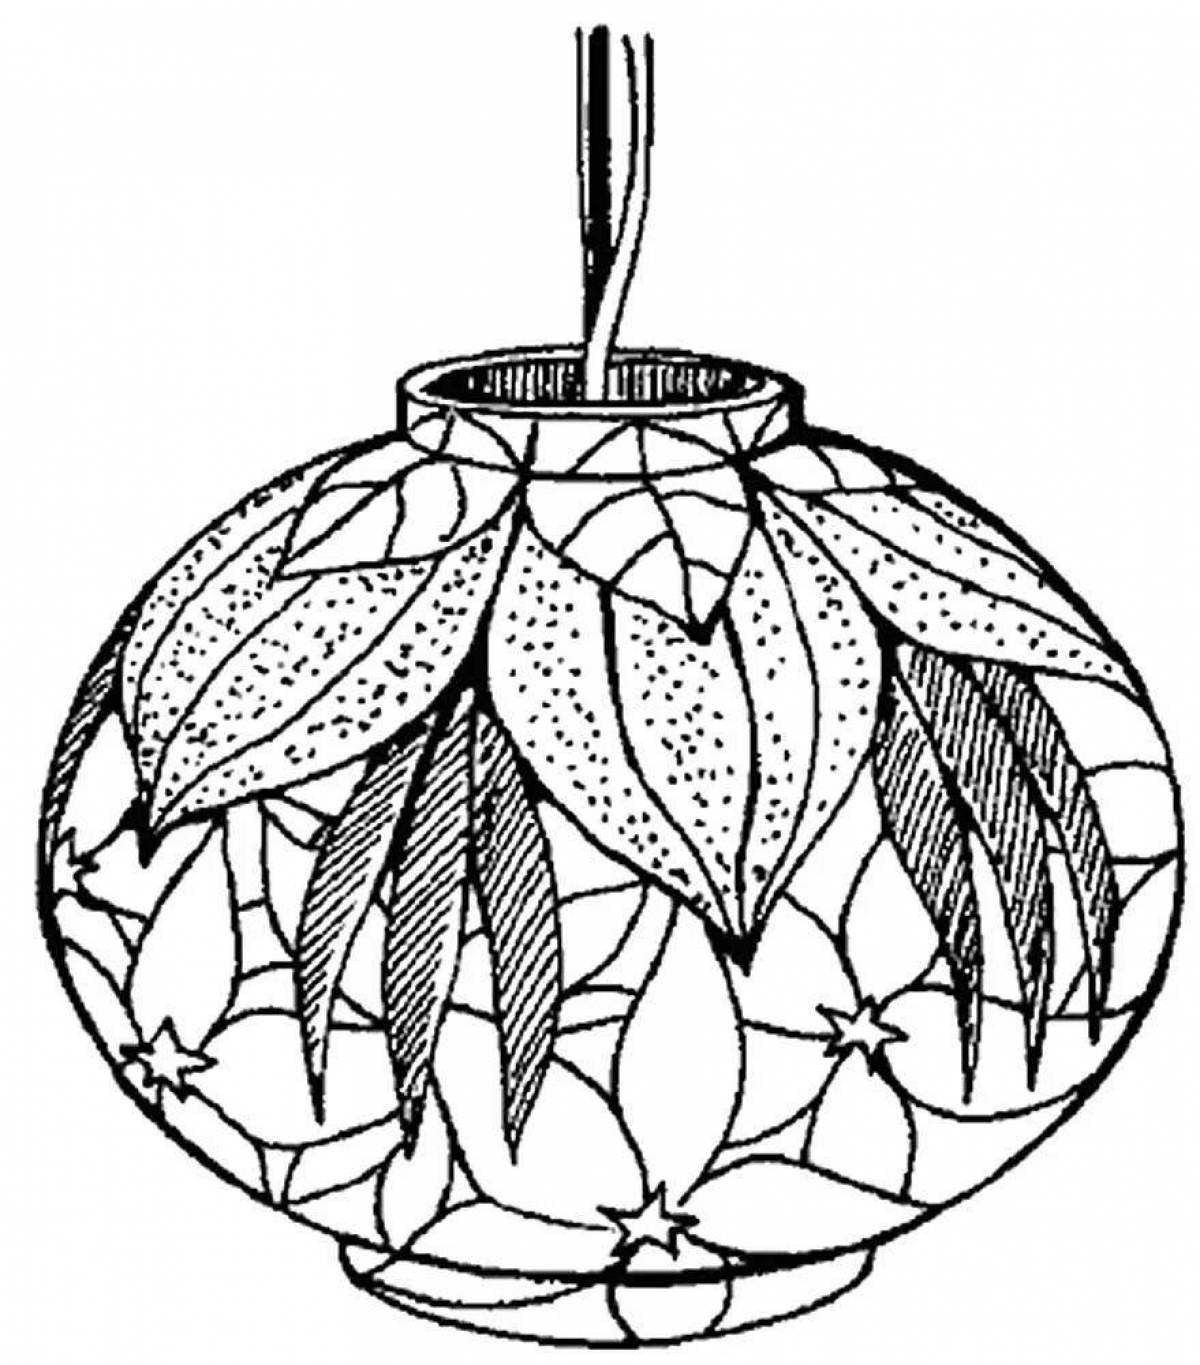 Great chandelier coloring book for kids